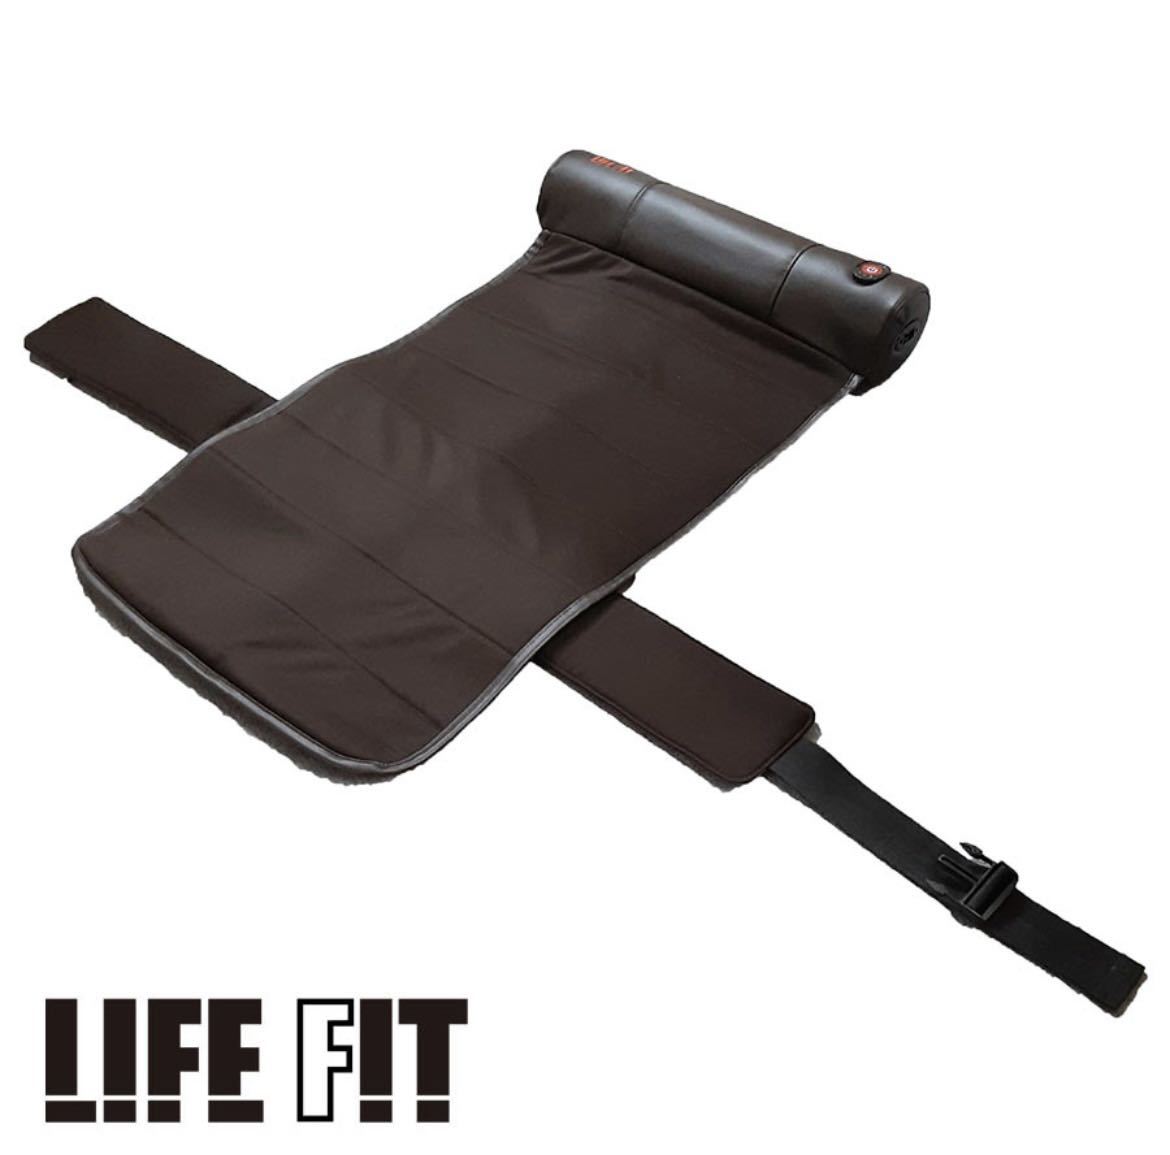 ▲LIFE FIT ライフフィット エアー4 Fit005